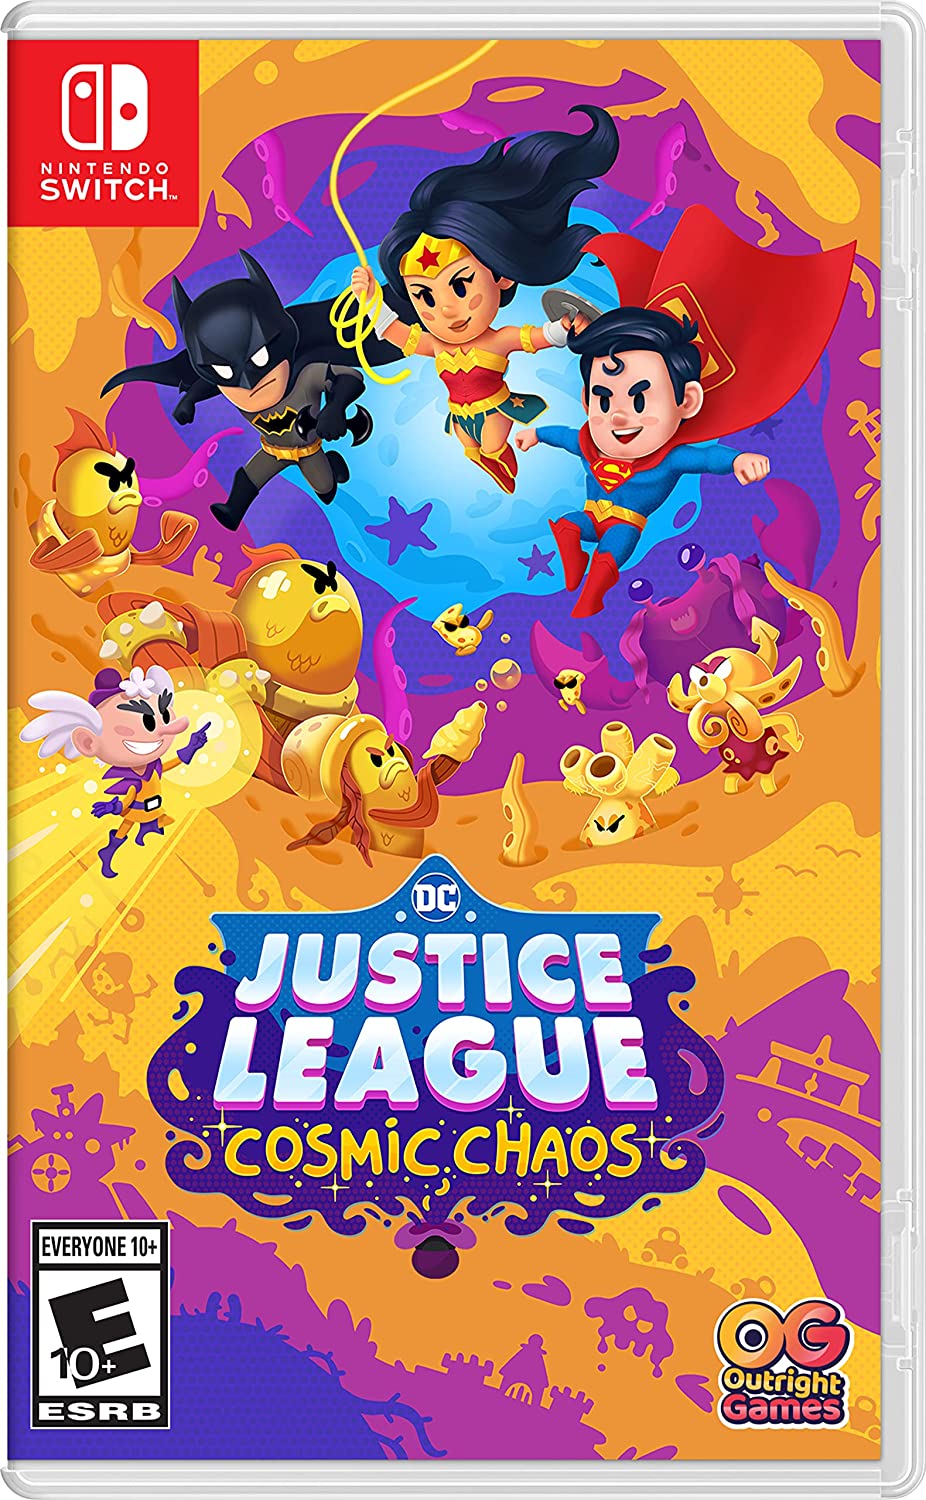 [Nintendo Switch] DC Justice League: Cosmic Chaos